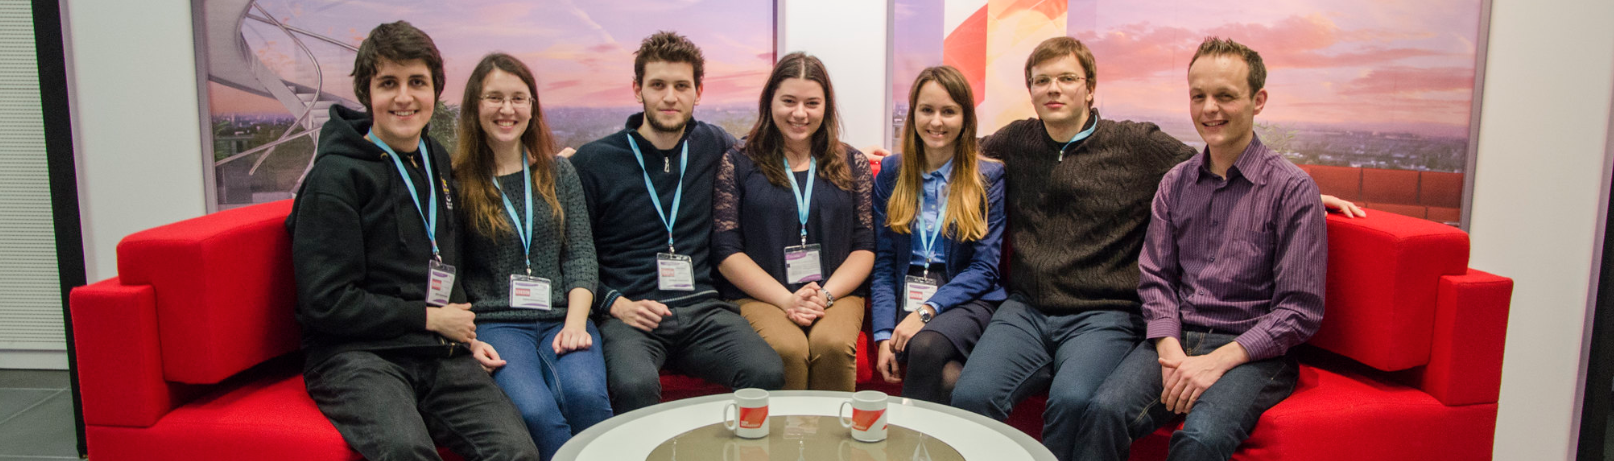 Posing on the BBC Breakfast red sofa with the winning student team at the BBC / Barclays University Technology Challenge (UTC) in MediaCityUK, Salford, Greater Manchester.